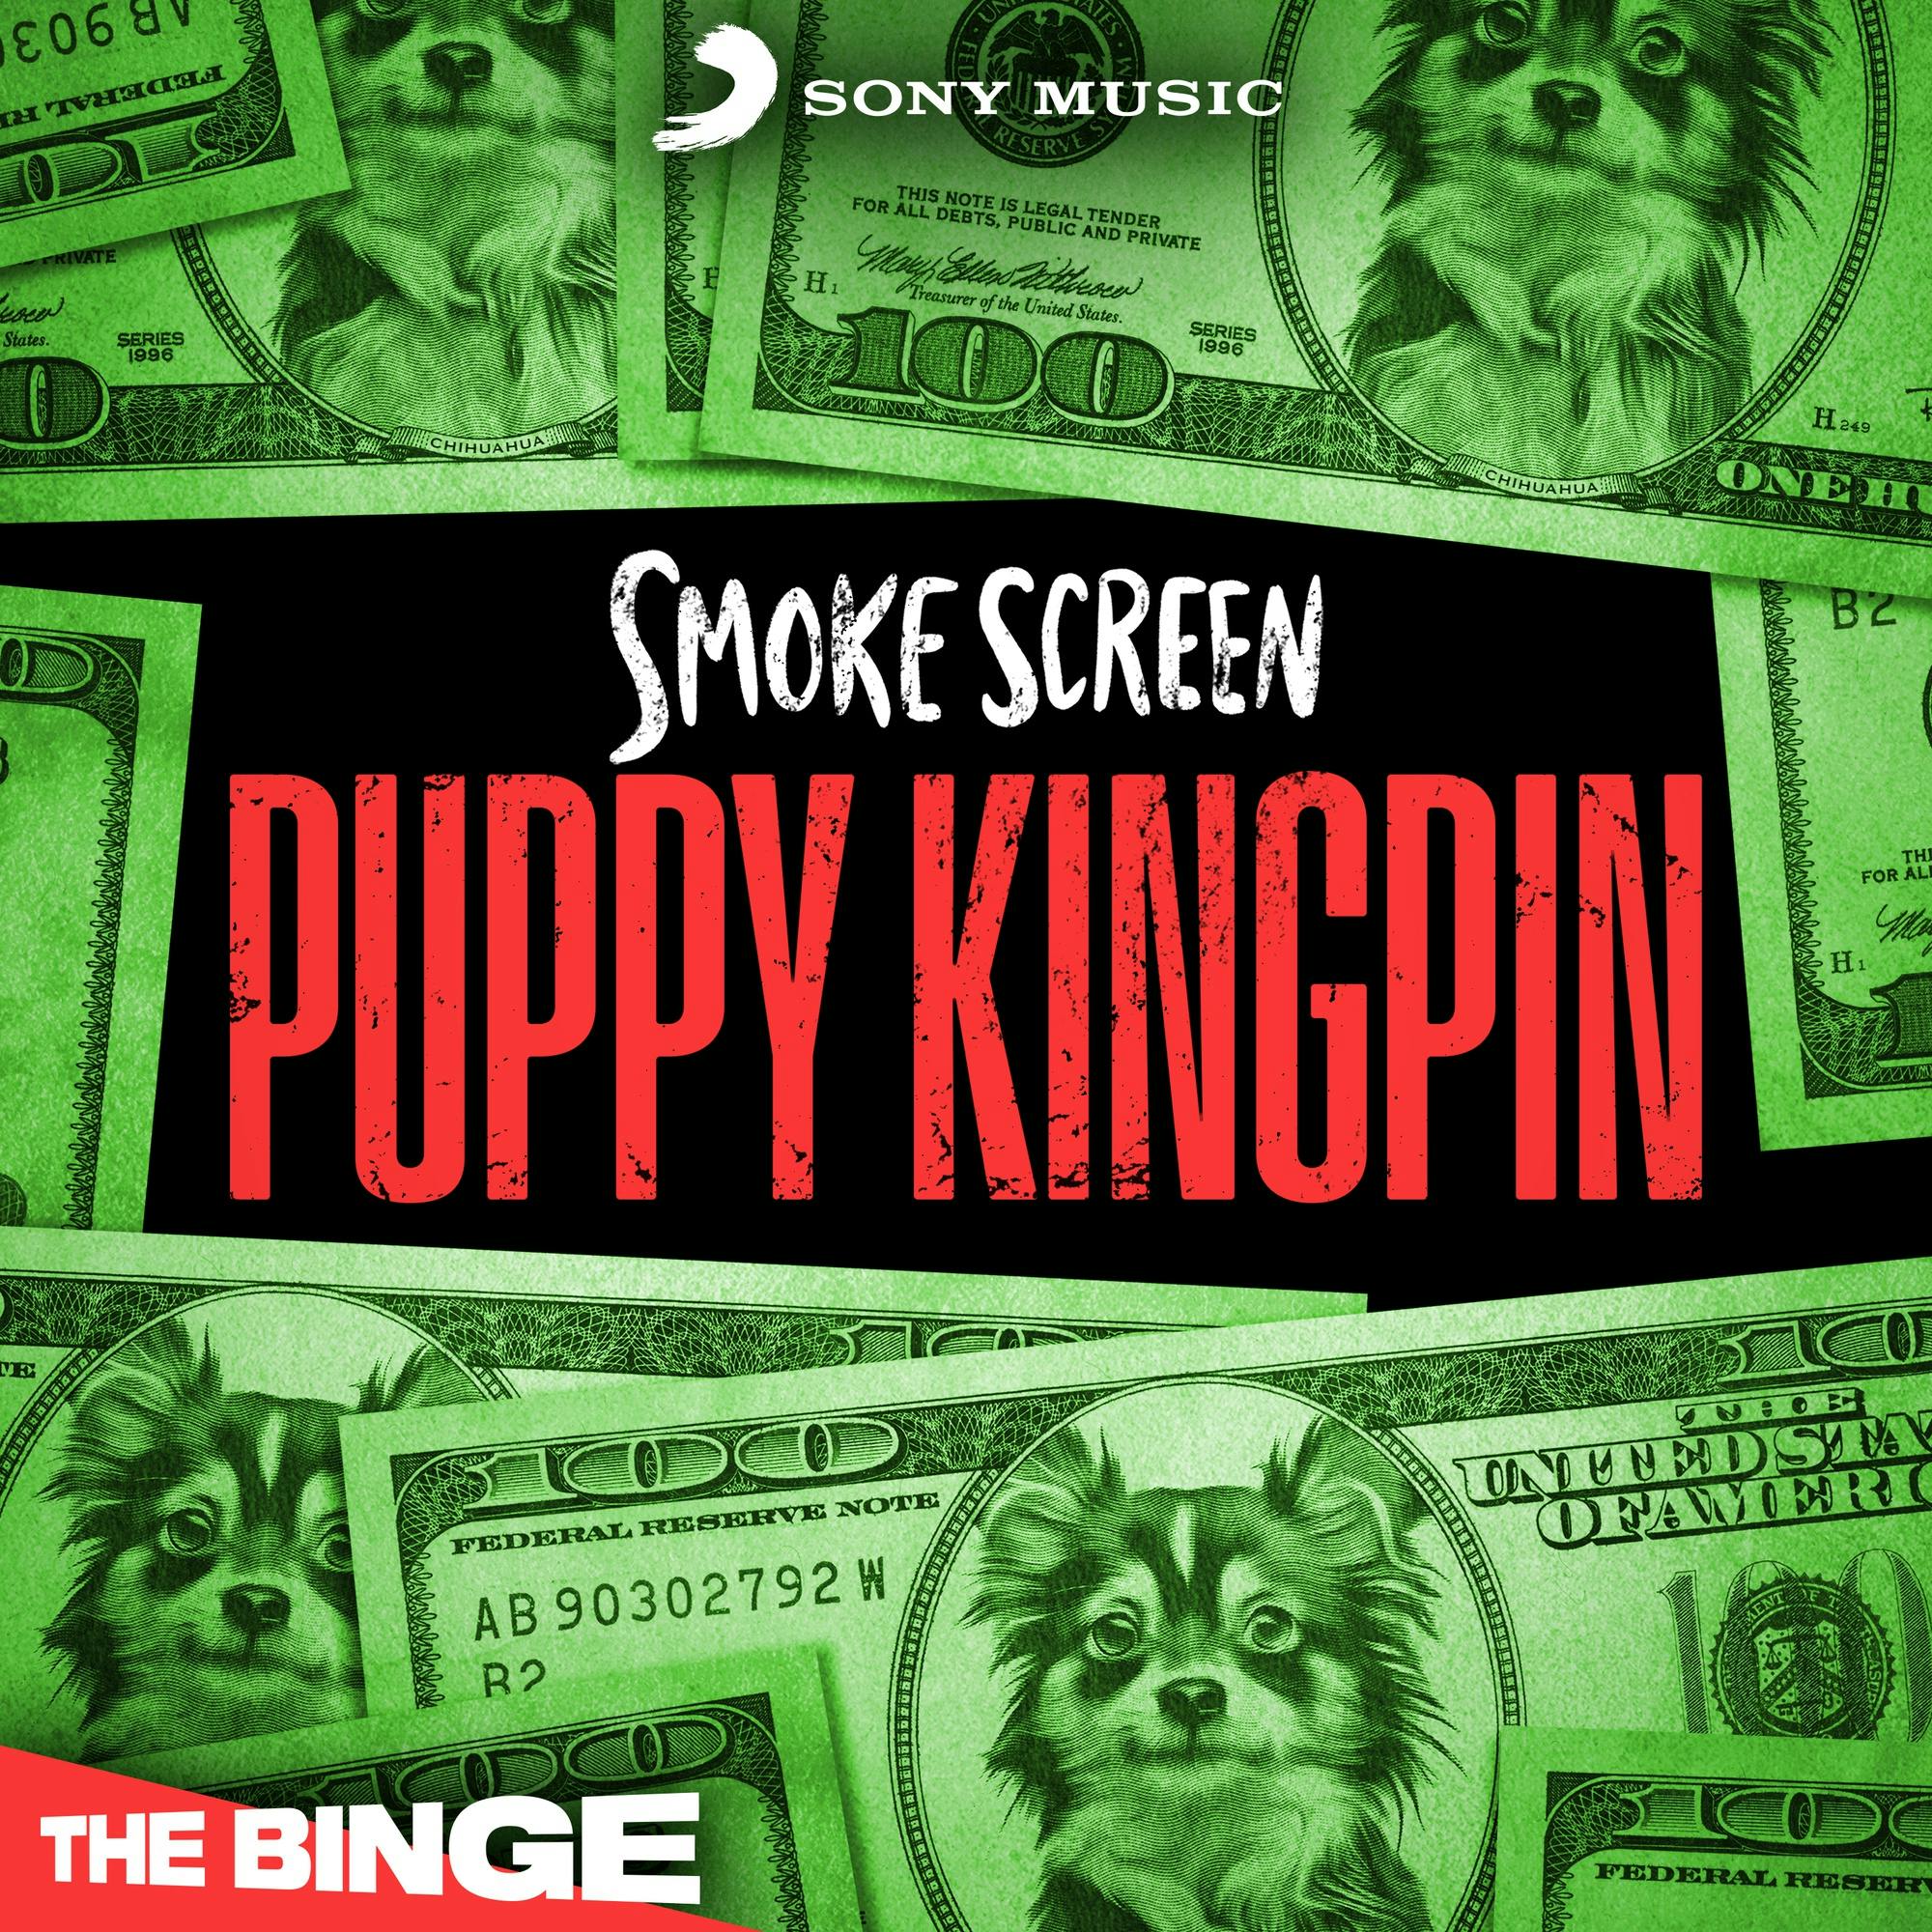 Puppy Kingpin | 4. A Kind of Identity Theft